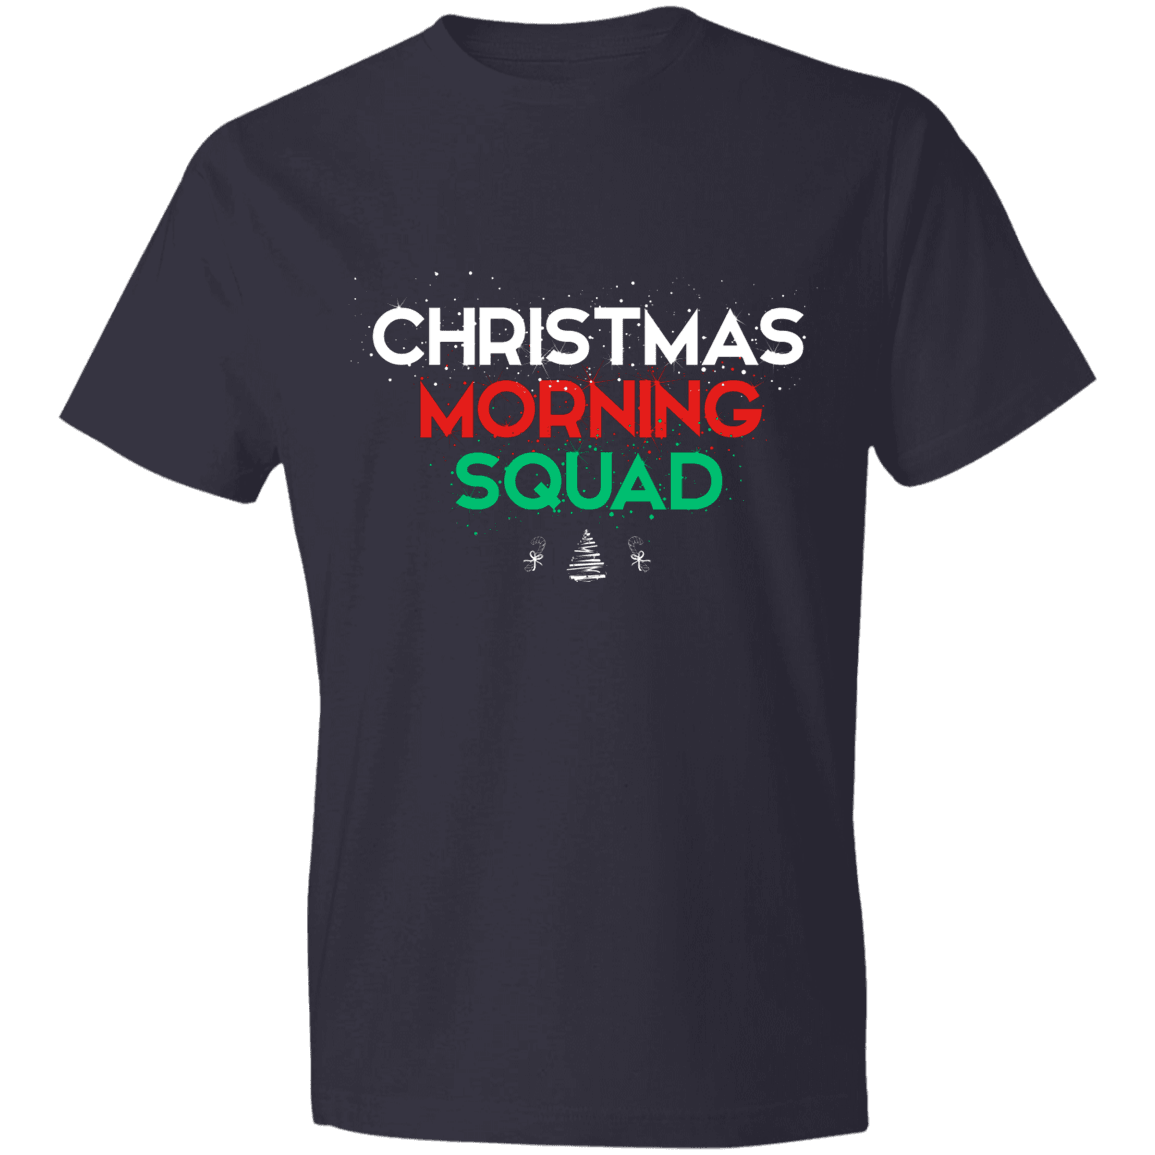 Designs by MyUtopia Shout Out:Christmas Morning Squad - Lightweight Unisex T-Shirt,Navy / S,Adult Unisex T-Shirt